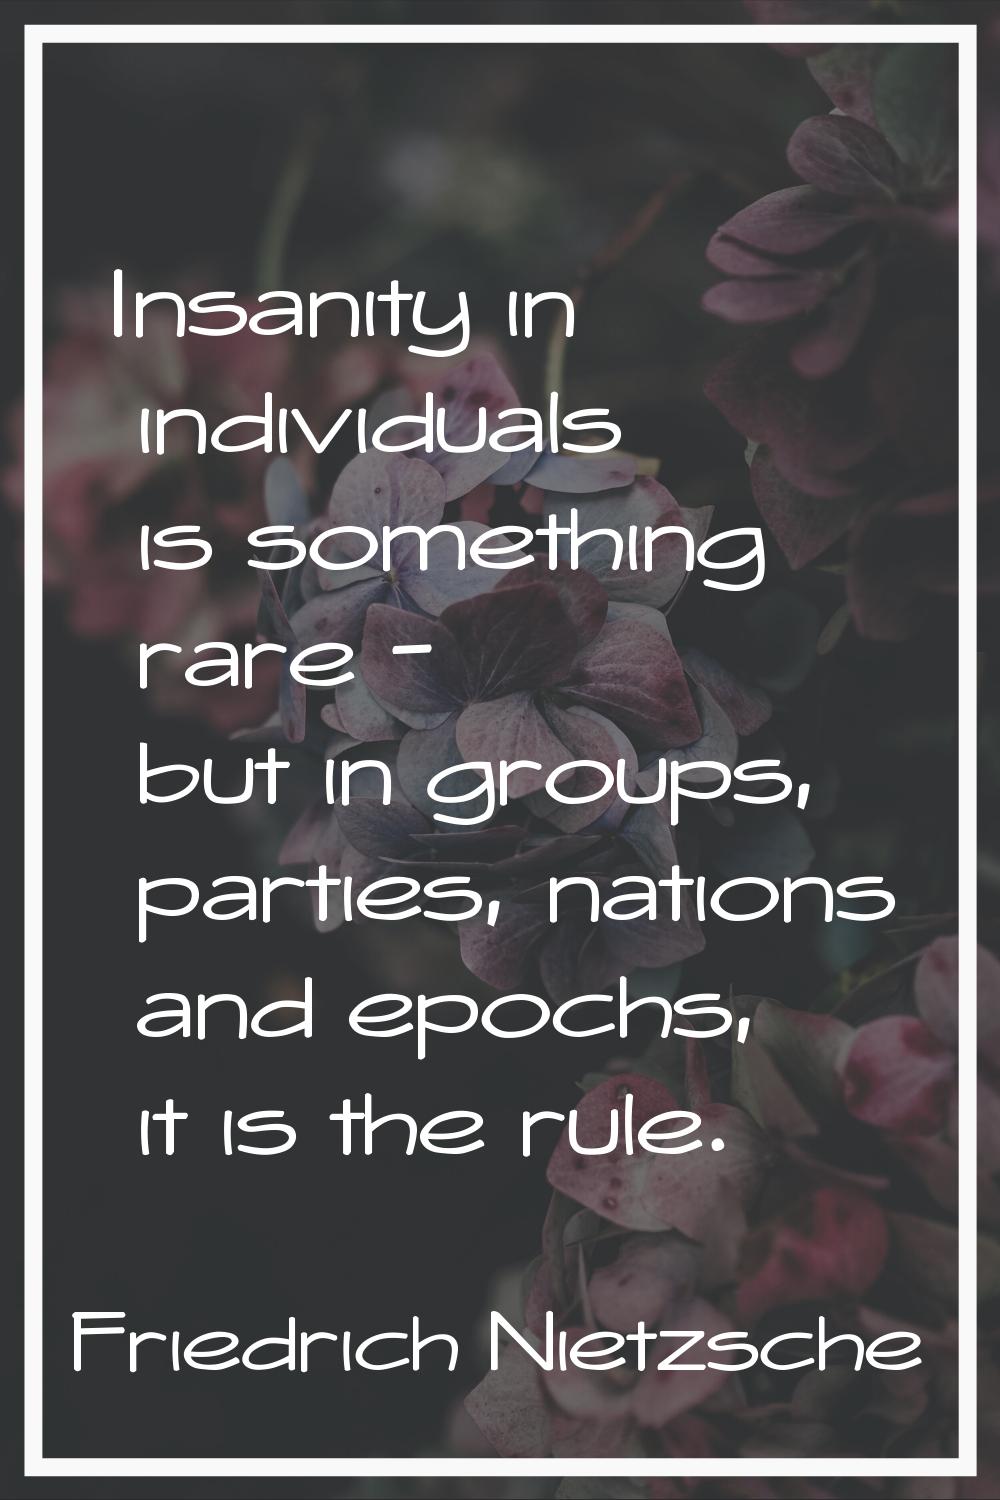 Insanity in individuals is something rare - but in groups, parties, nations and epochs, it is the r